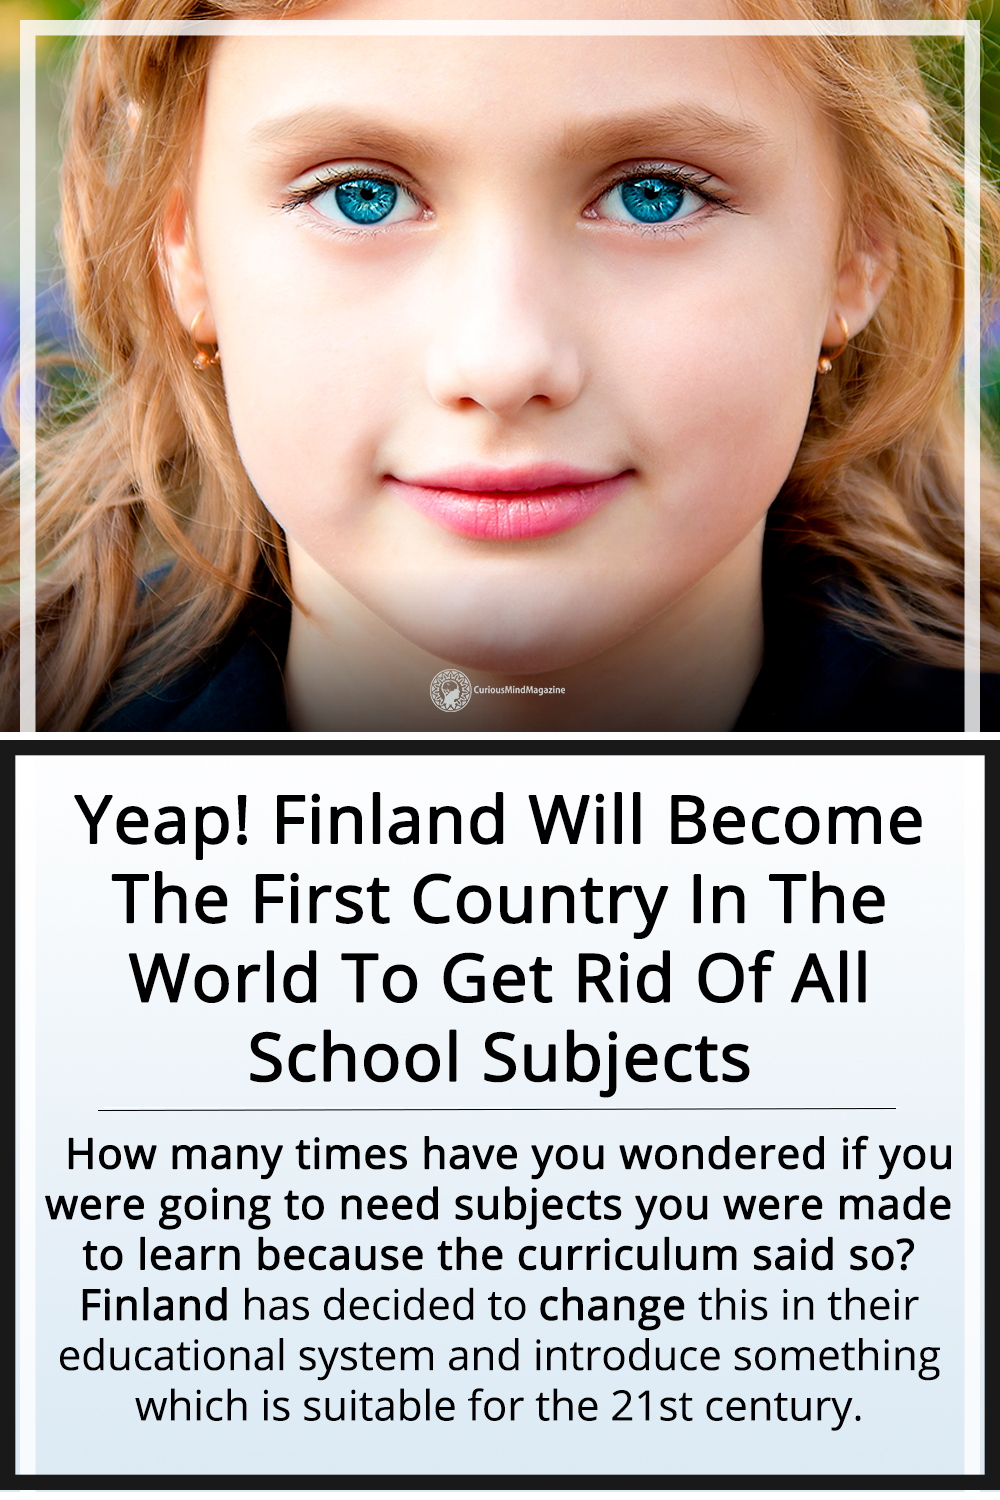 Finland’s Education System Is Considered The Best In The World – Here’s Why!